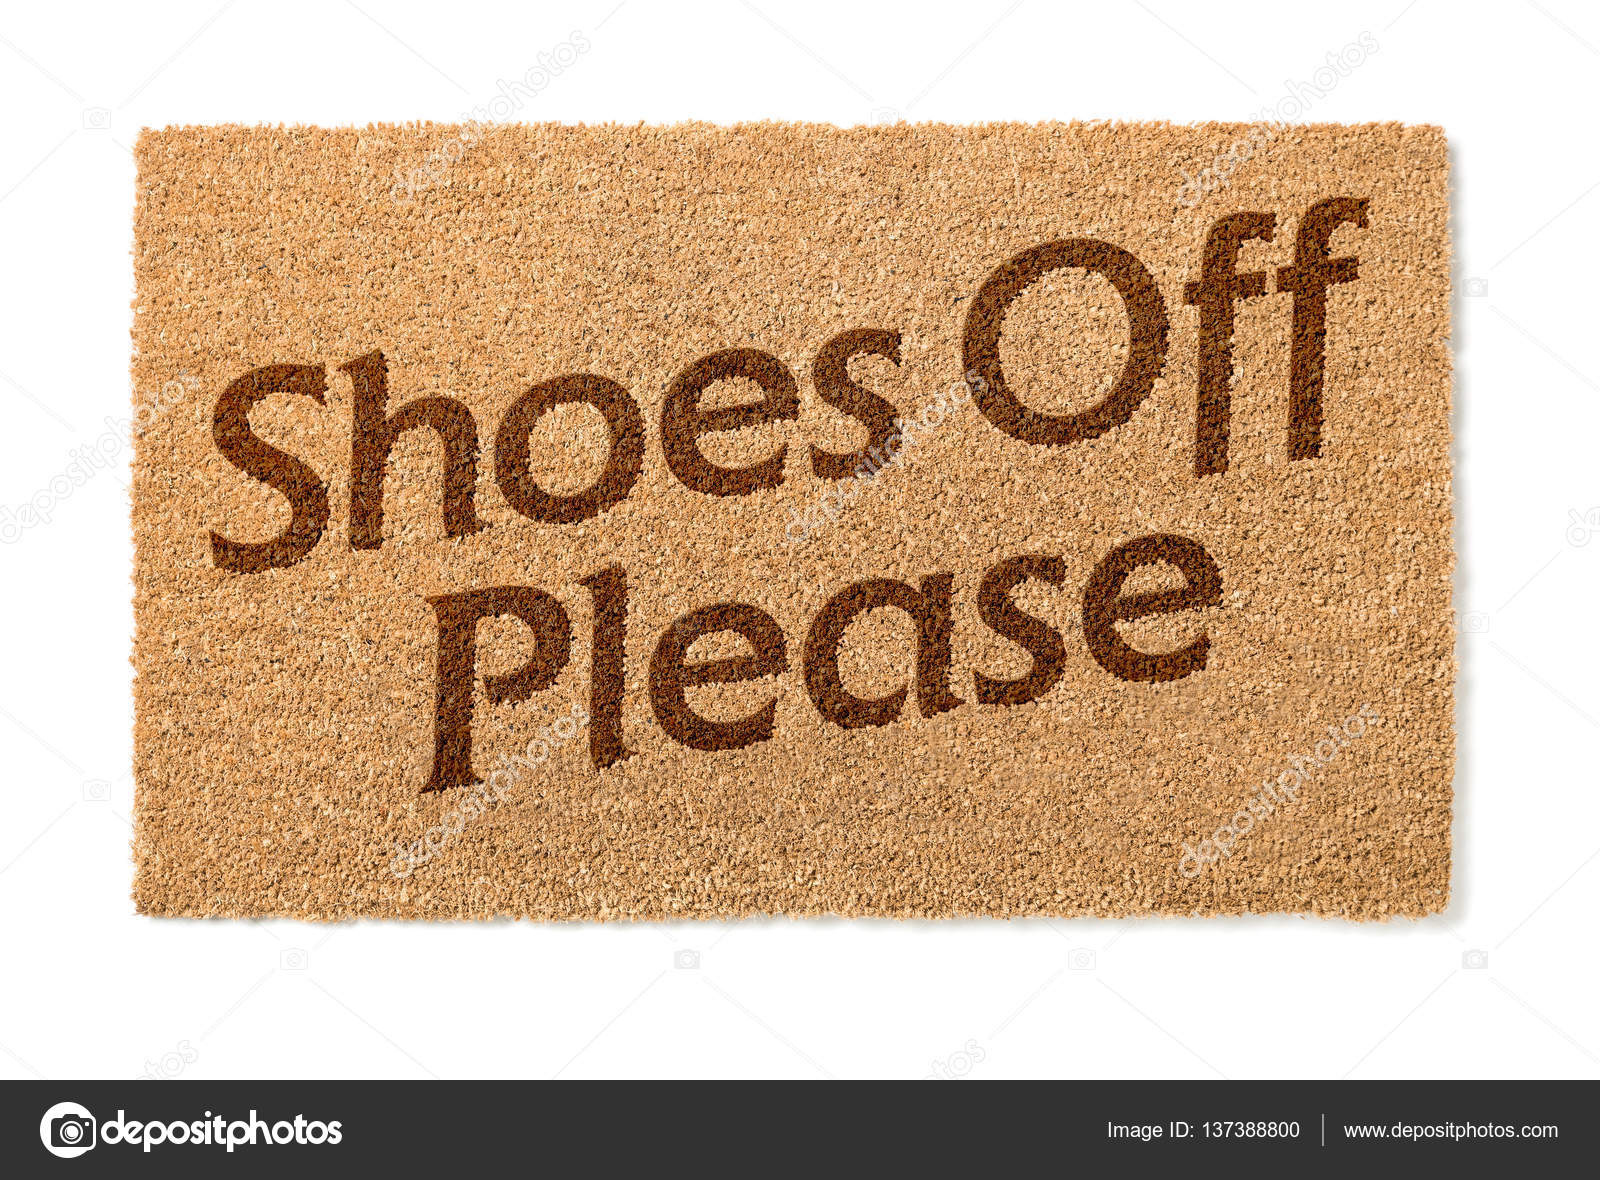 Shoes off Doormat, Shoes off Door Mat, Shoes off Mat, Shoes off